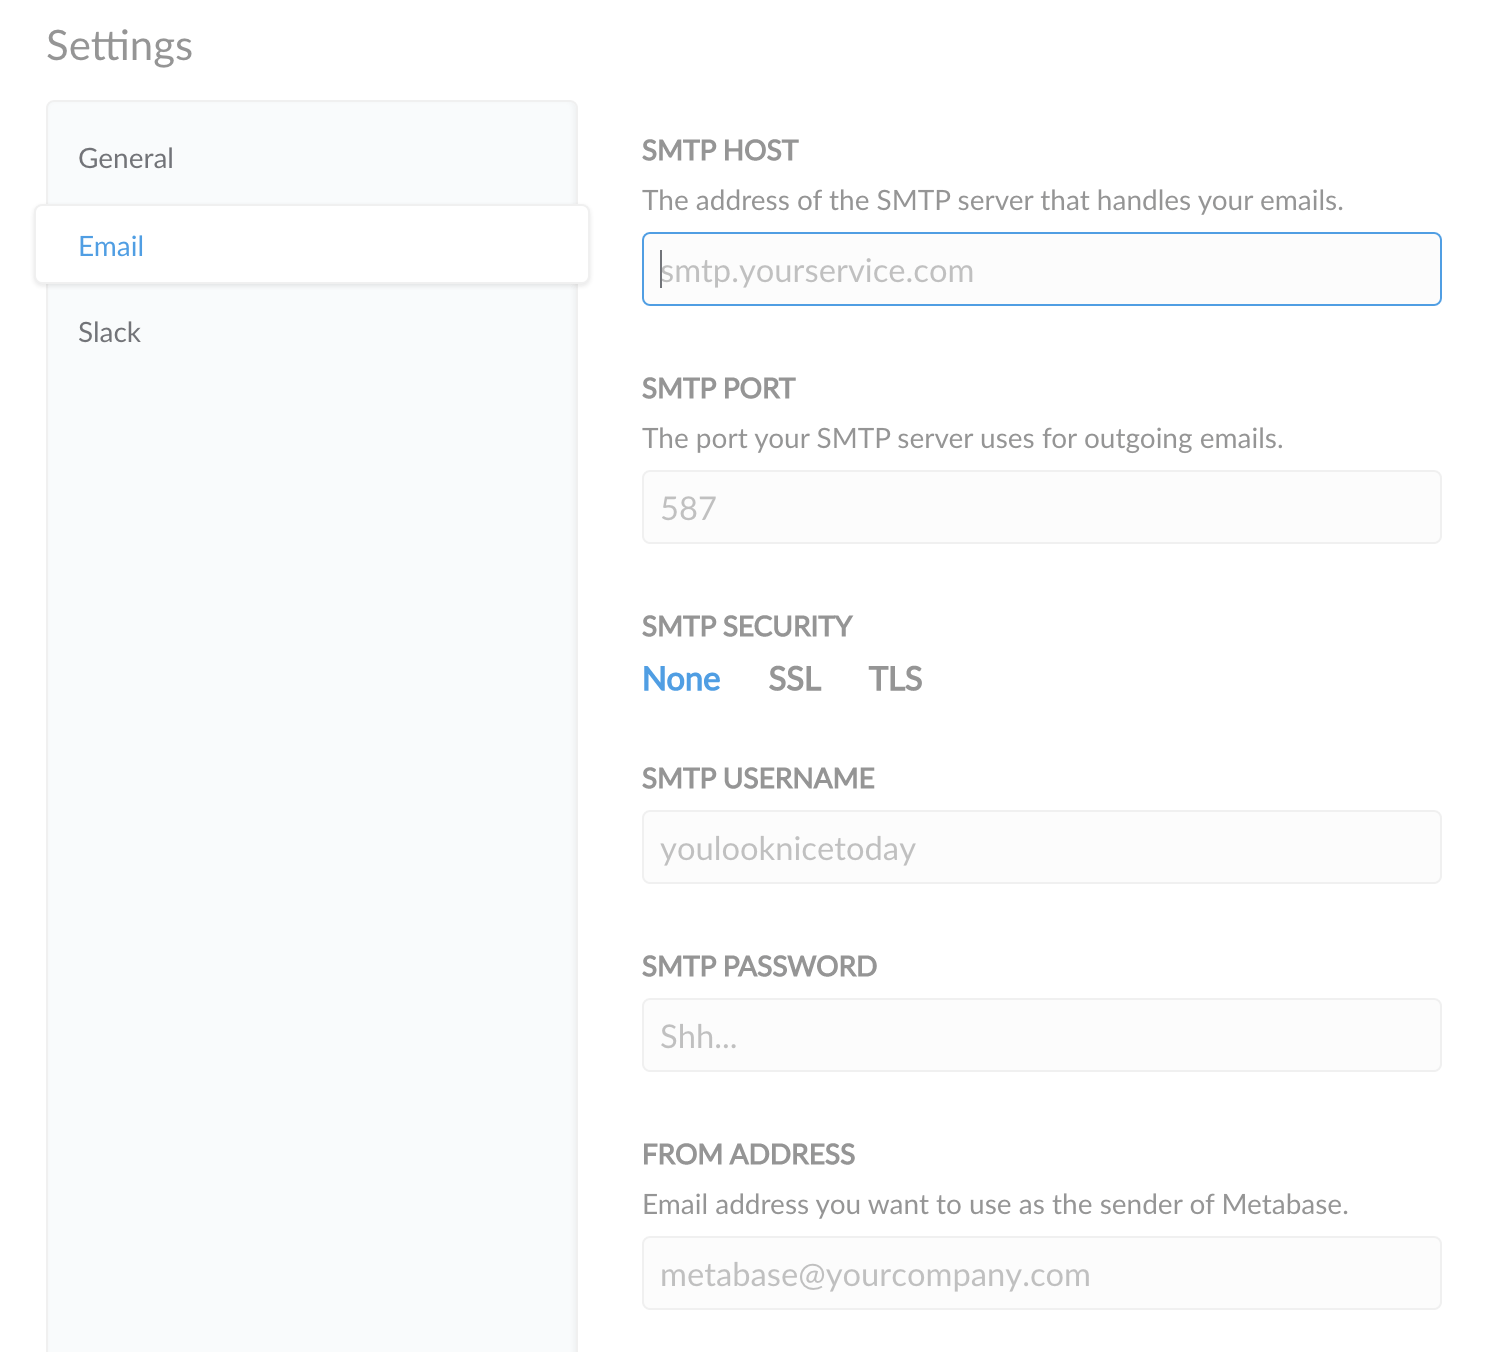 https://www.metabase.com/docs/latest/configuring-metabase/images/EmailCredentials.png